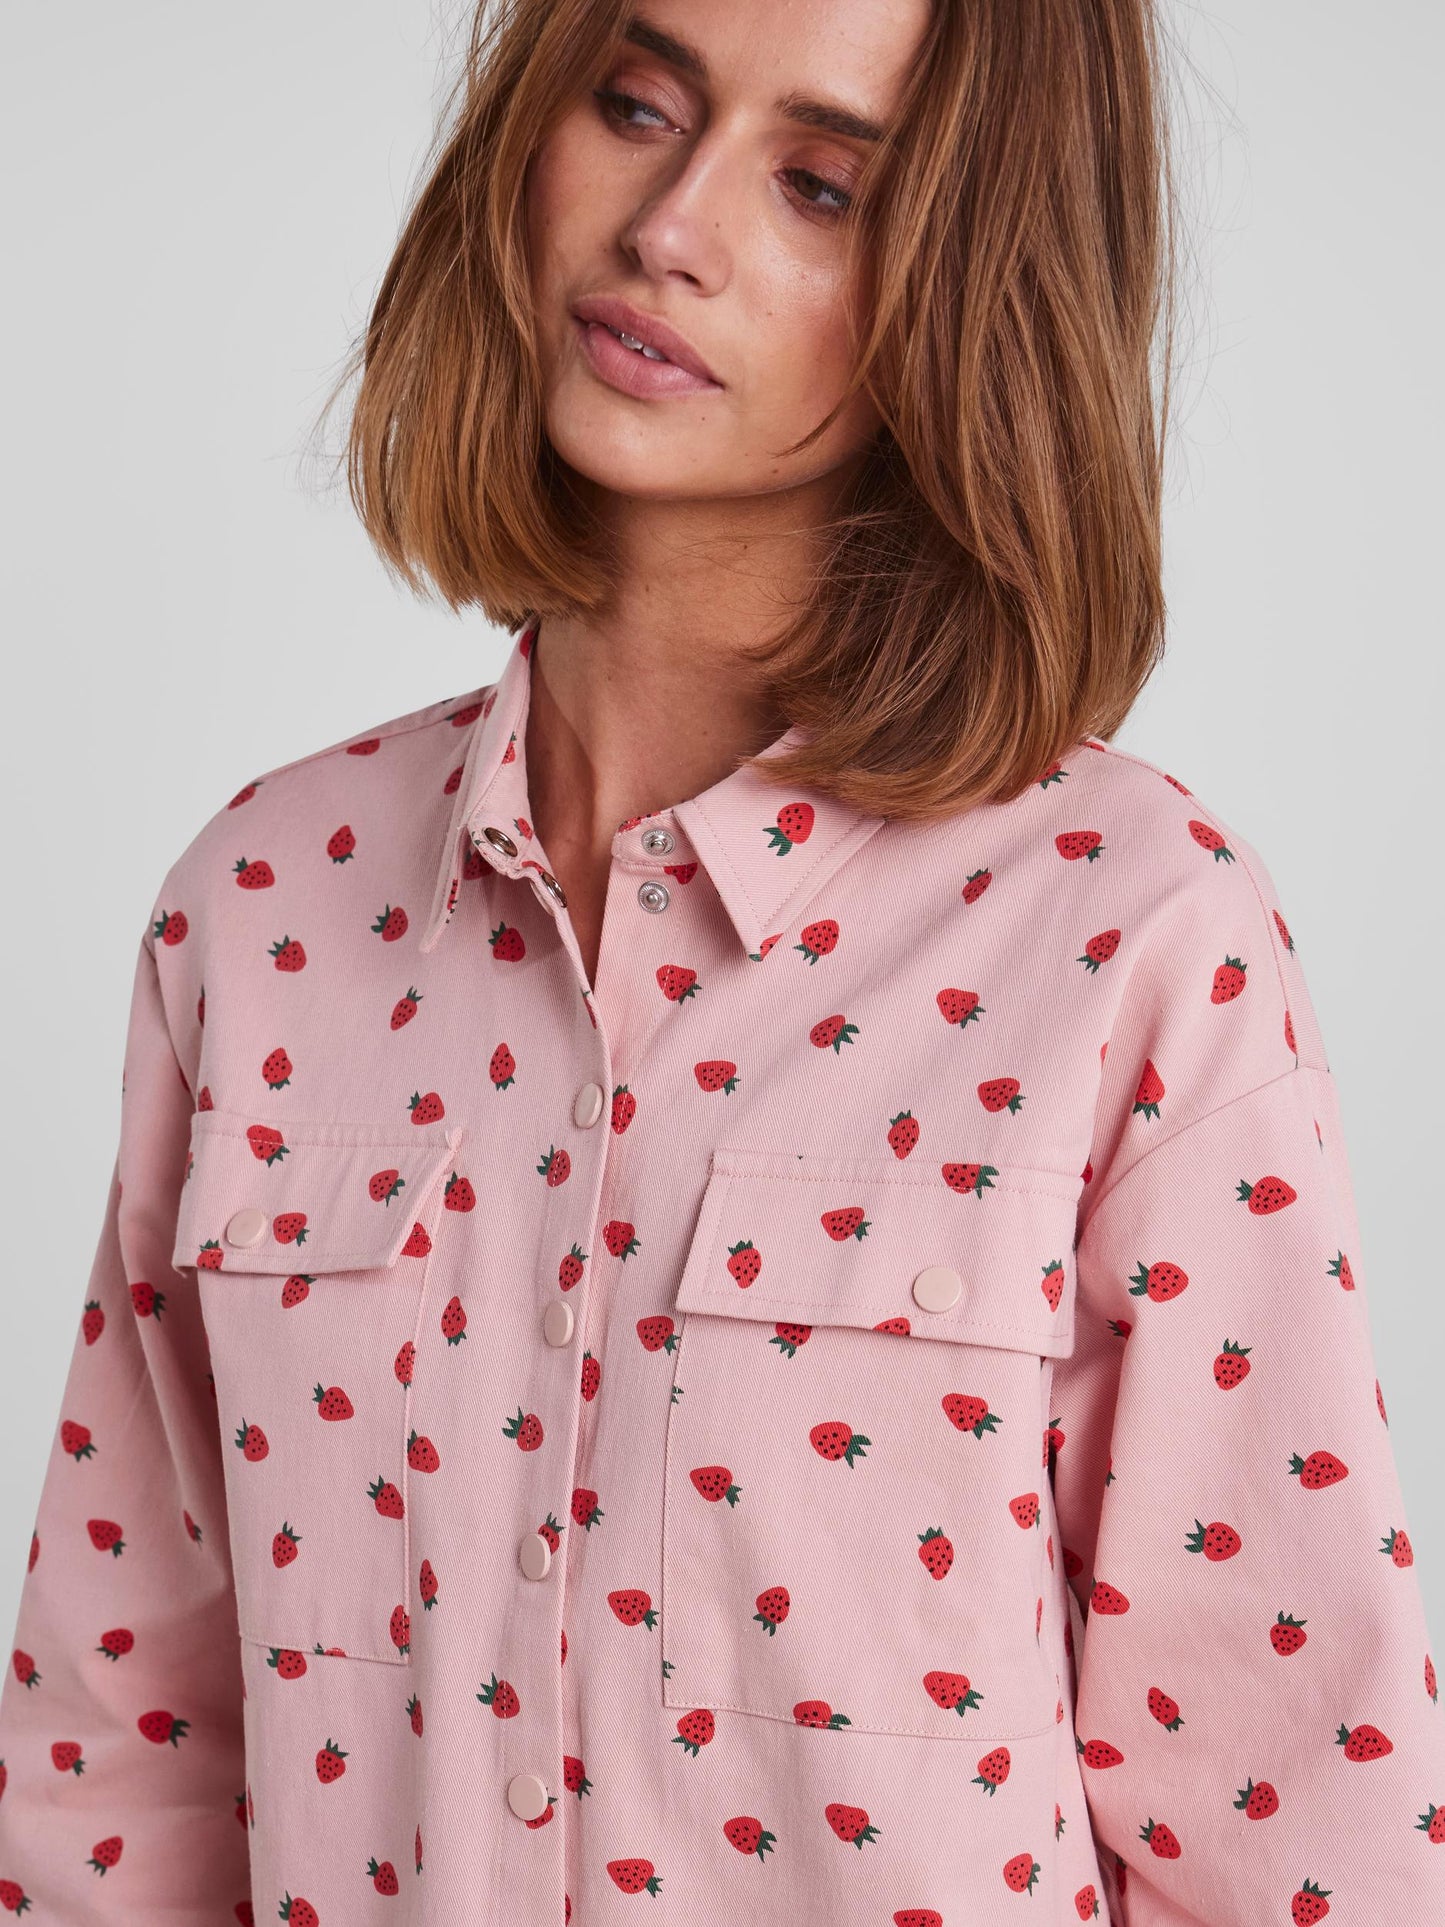 Pieces - Baby Pink Strawberry Printed Shirt